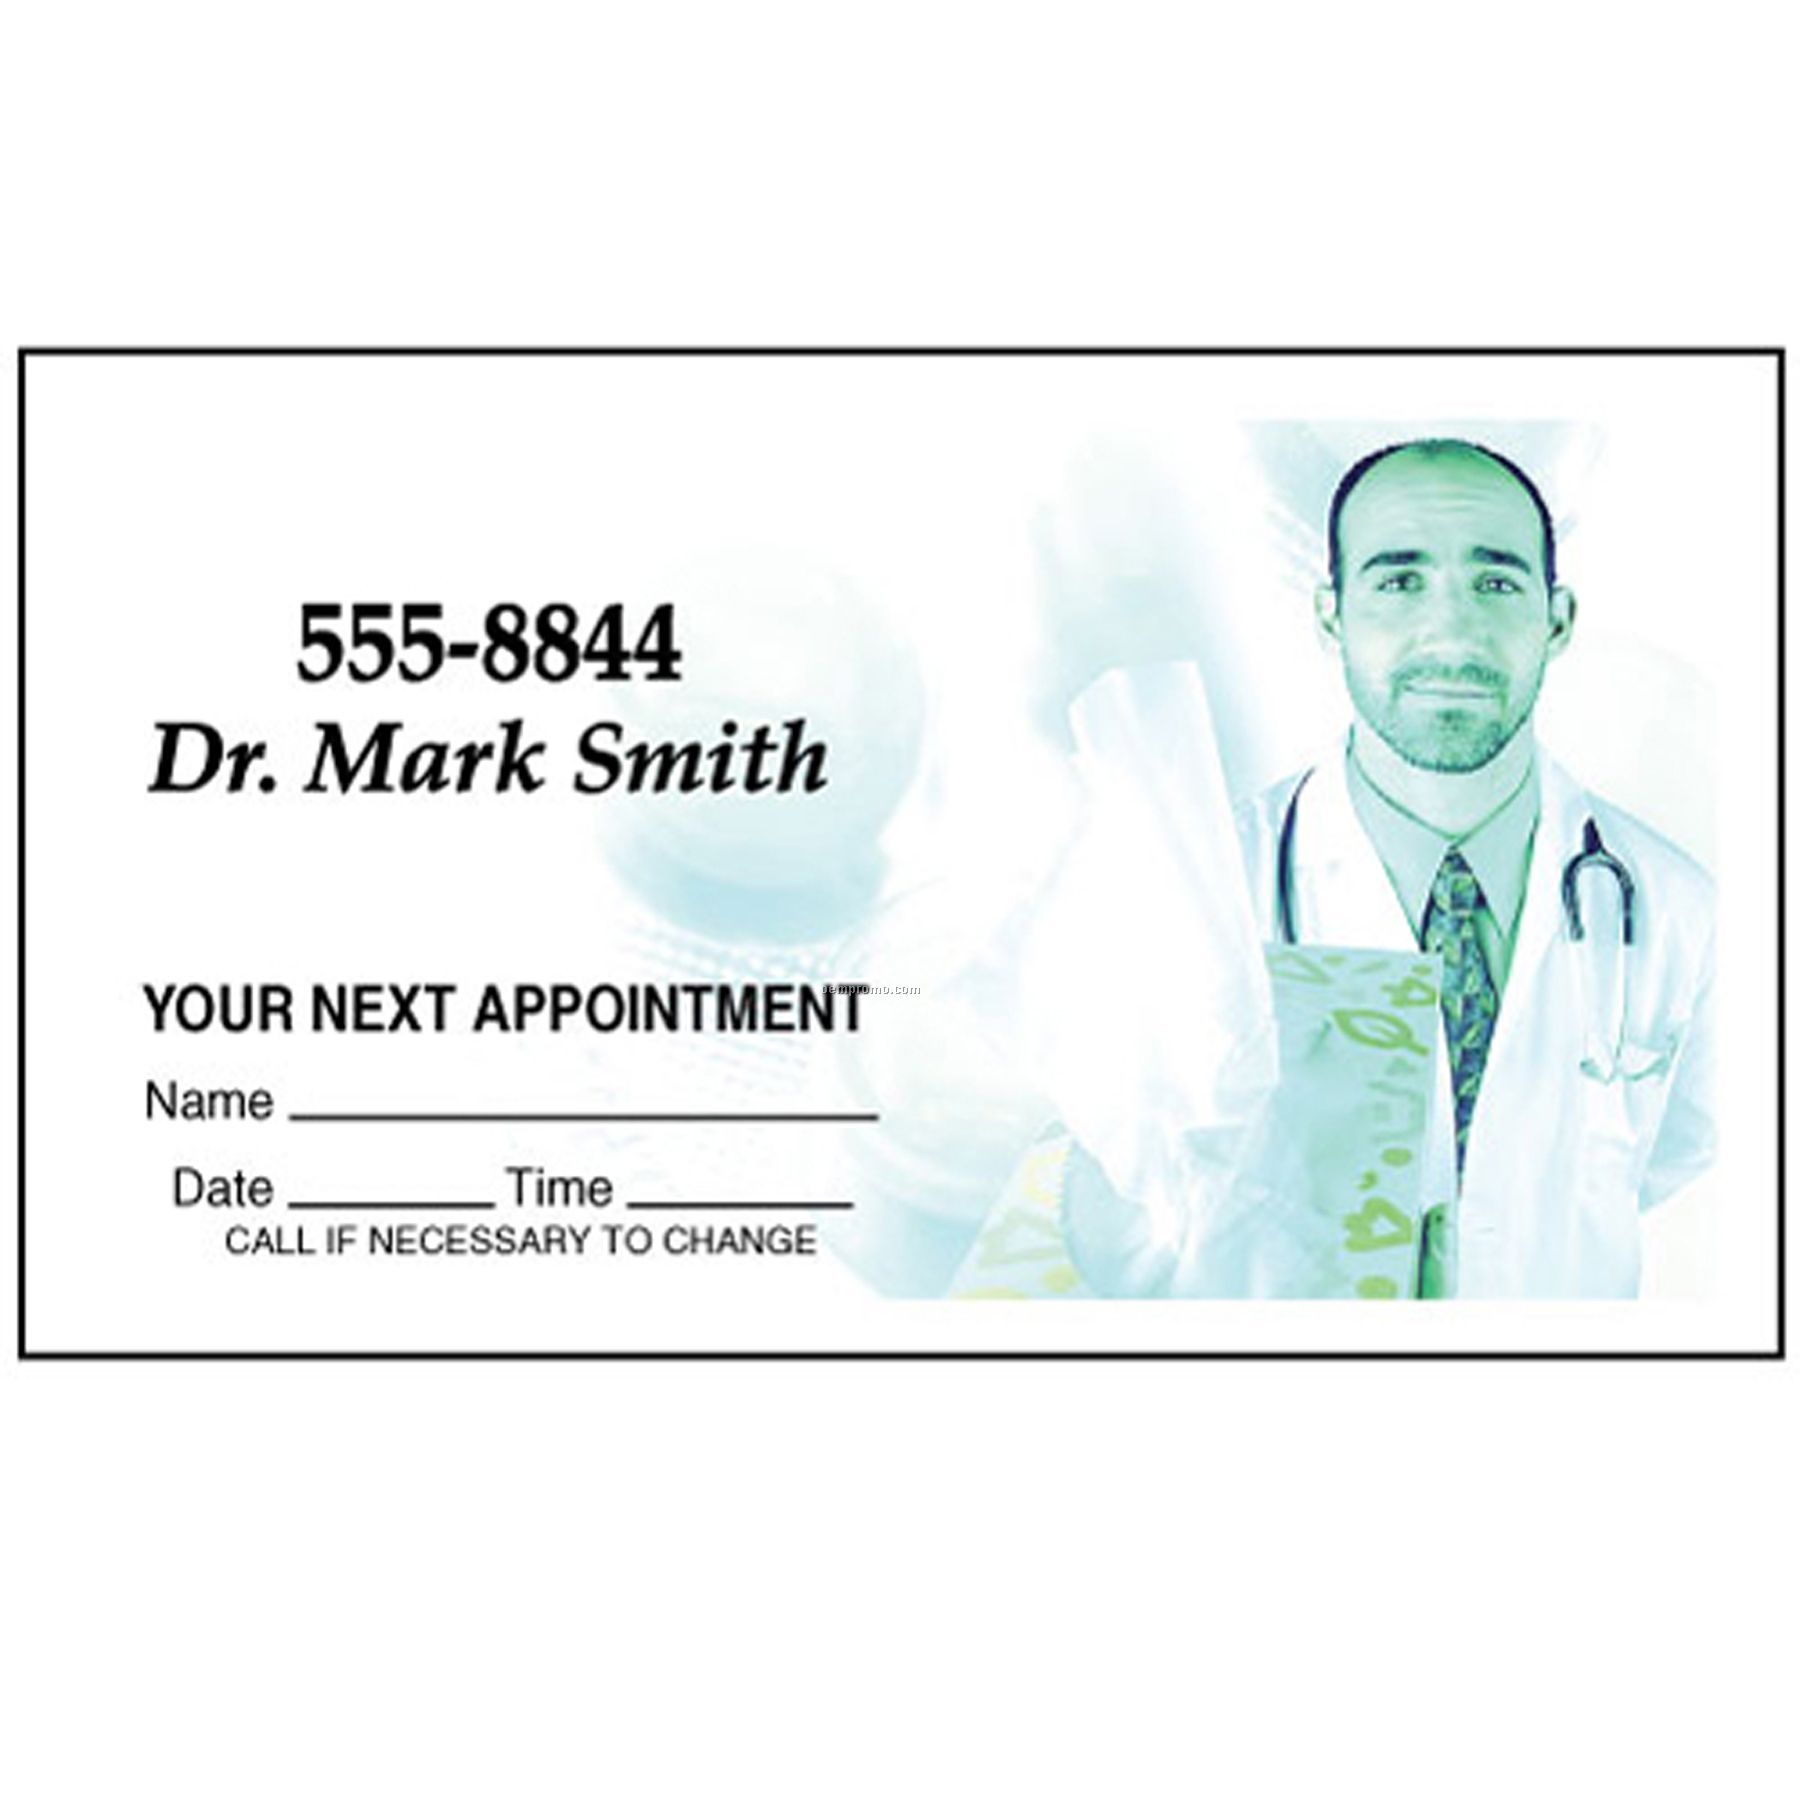 2" X 3.5" Appointment Reminder Card- Solid